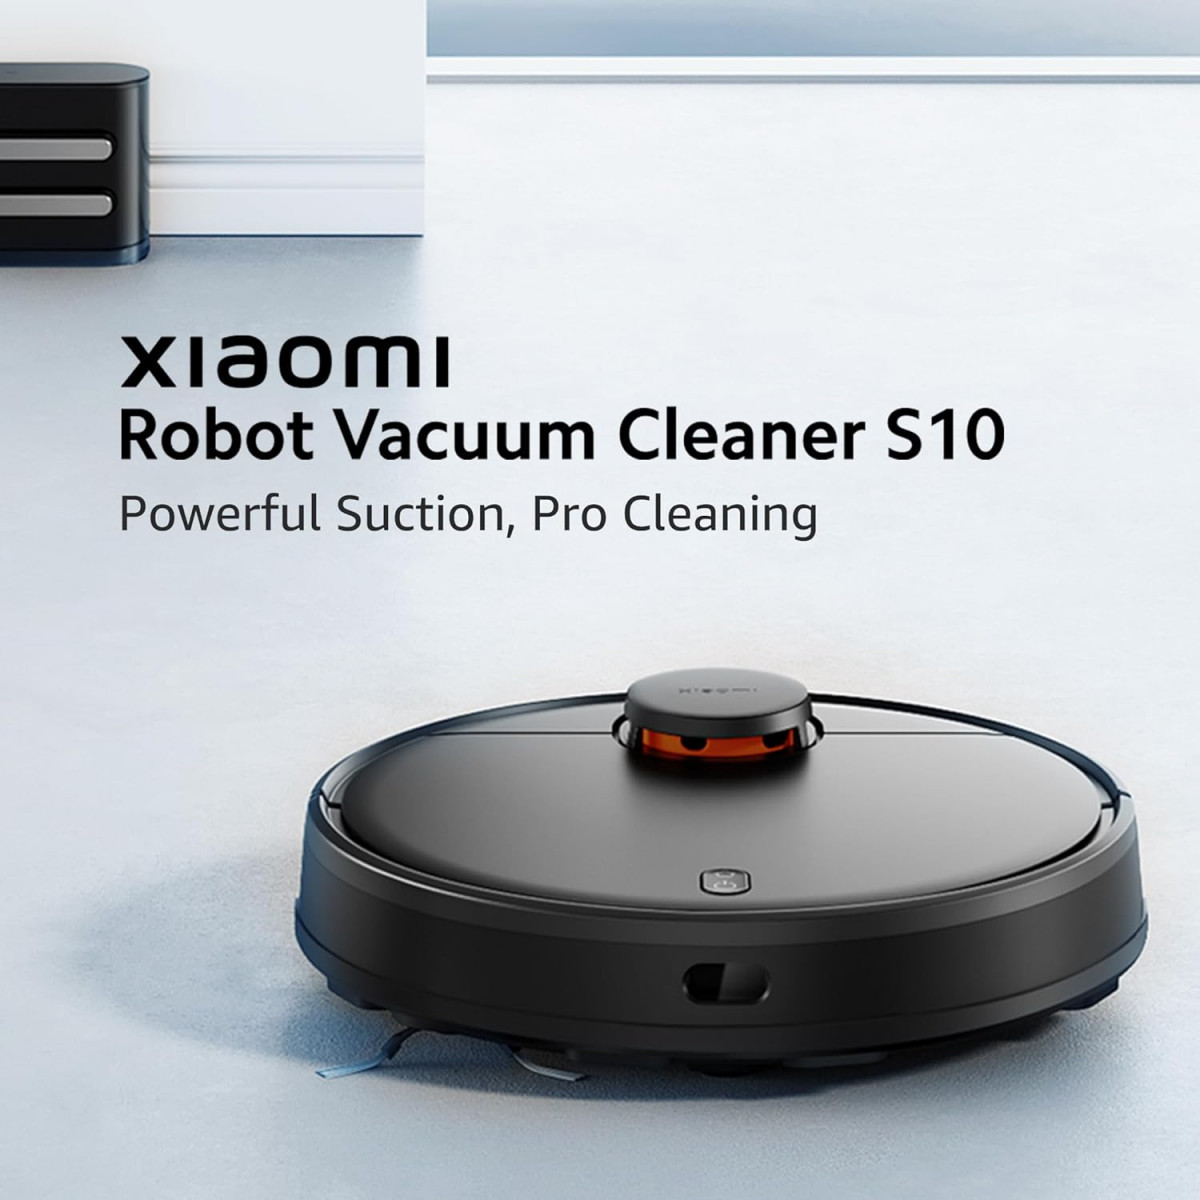 Xiaomi Robot Vacuum Cleaner S10 4000 Pa Turbo Suction Advanced Laser Navigation with 360 Degree Detection Smart Mapping Pro Cleaning Multiple Map Memory Daily Schedule Cleaning Vacuum and Mop